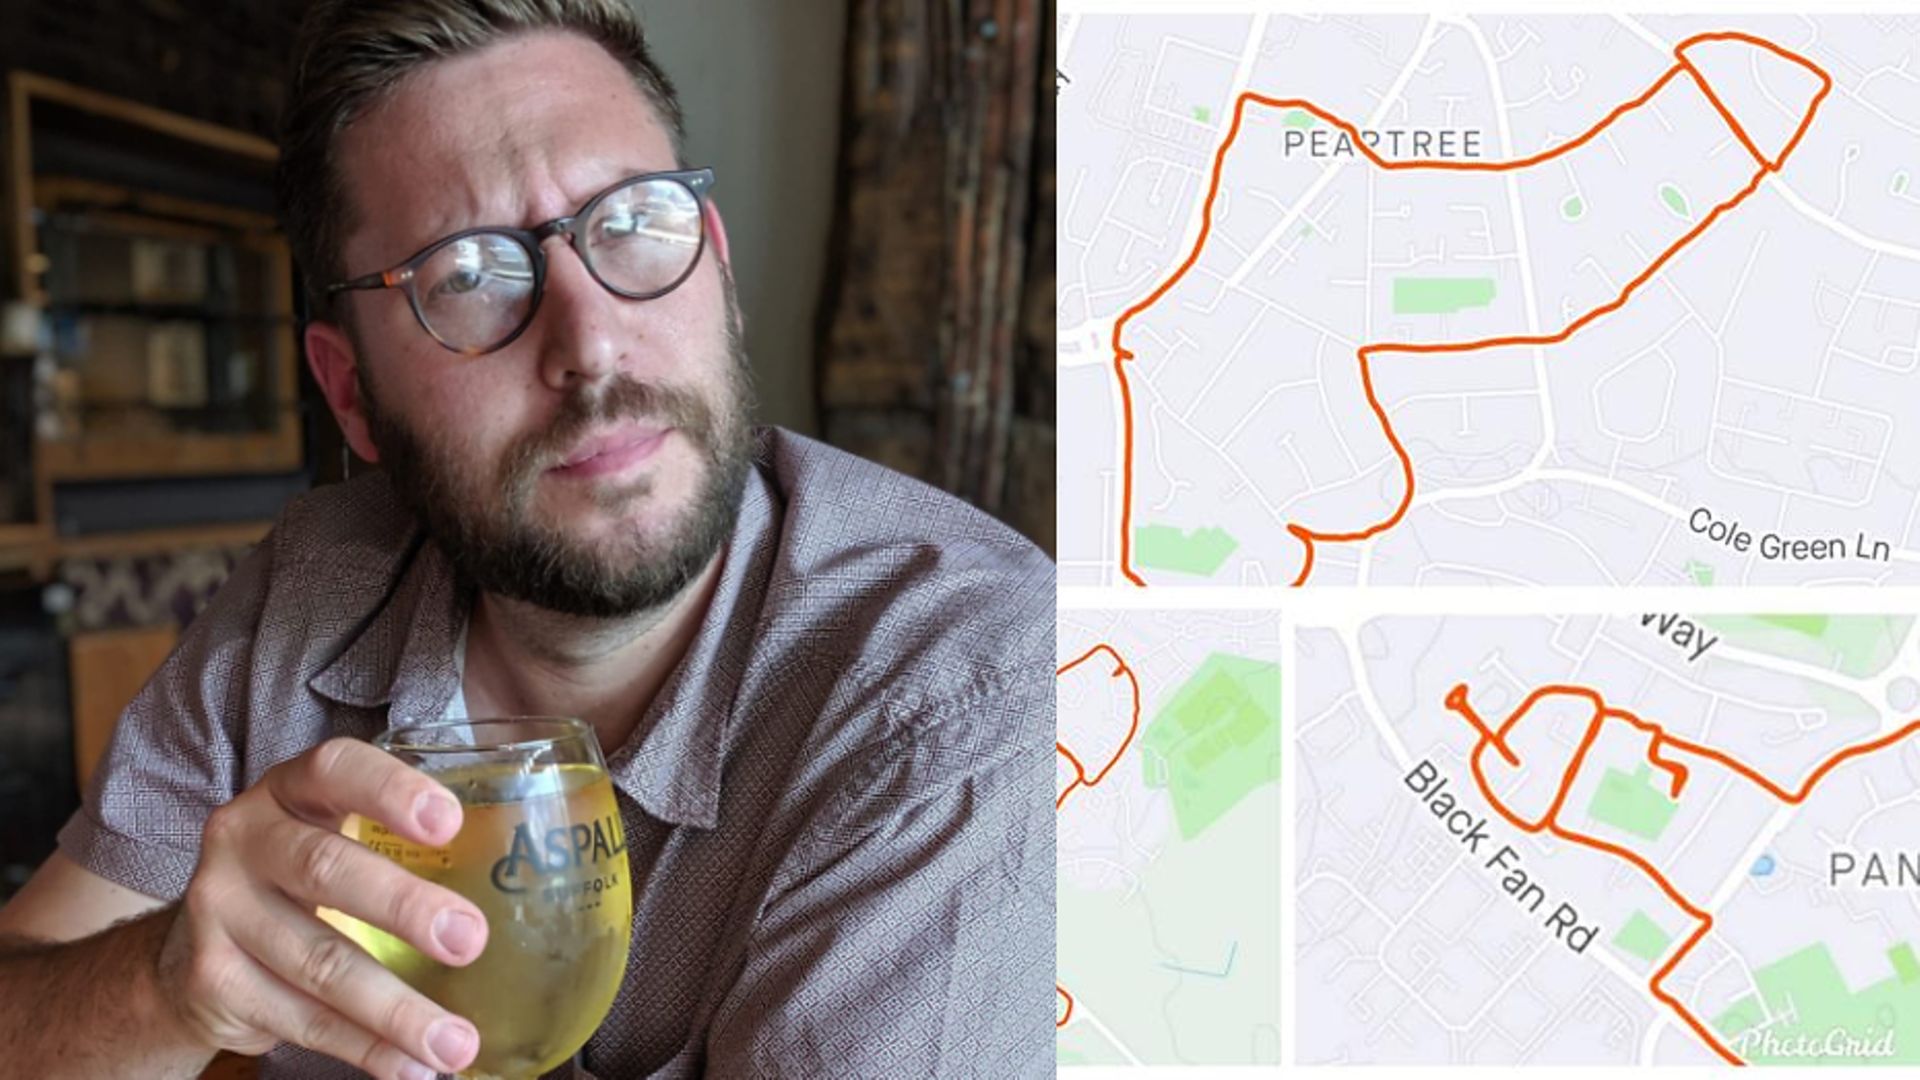 Man creates penis shapes with his running routes to raise money for testicular cancer